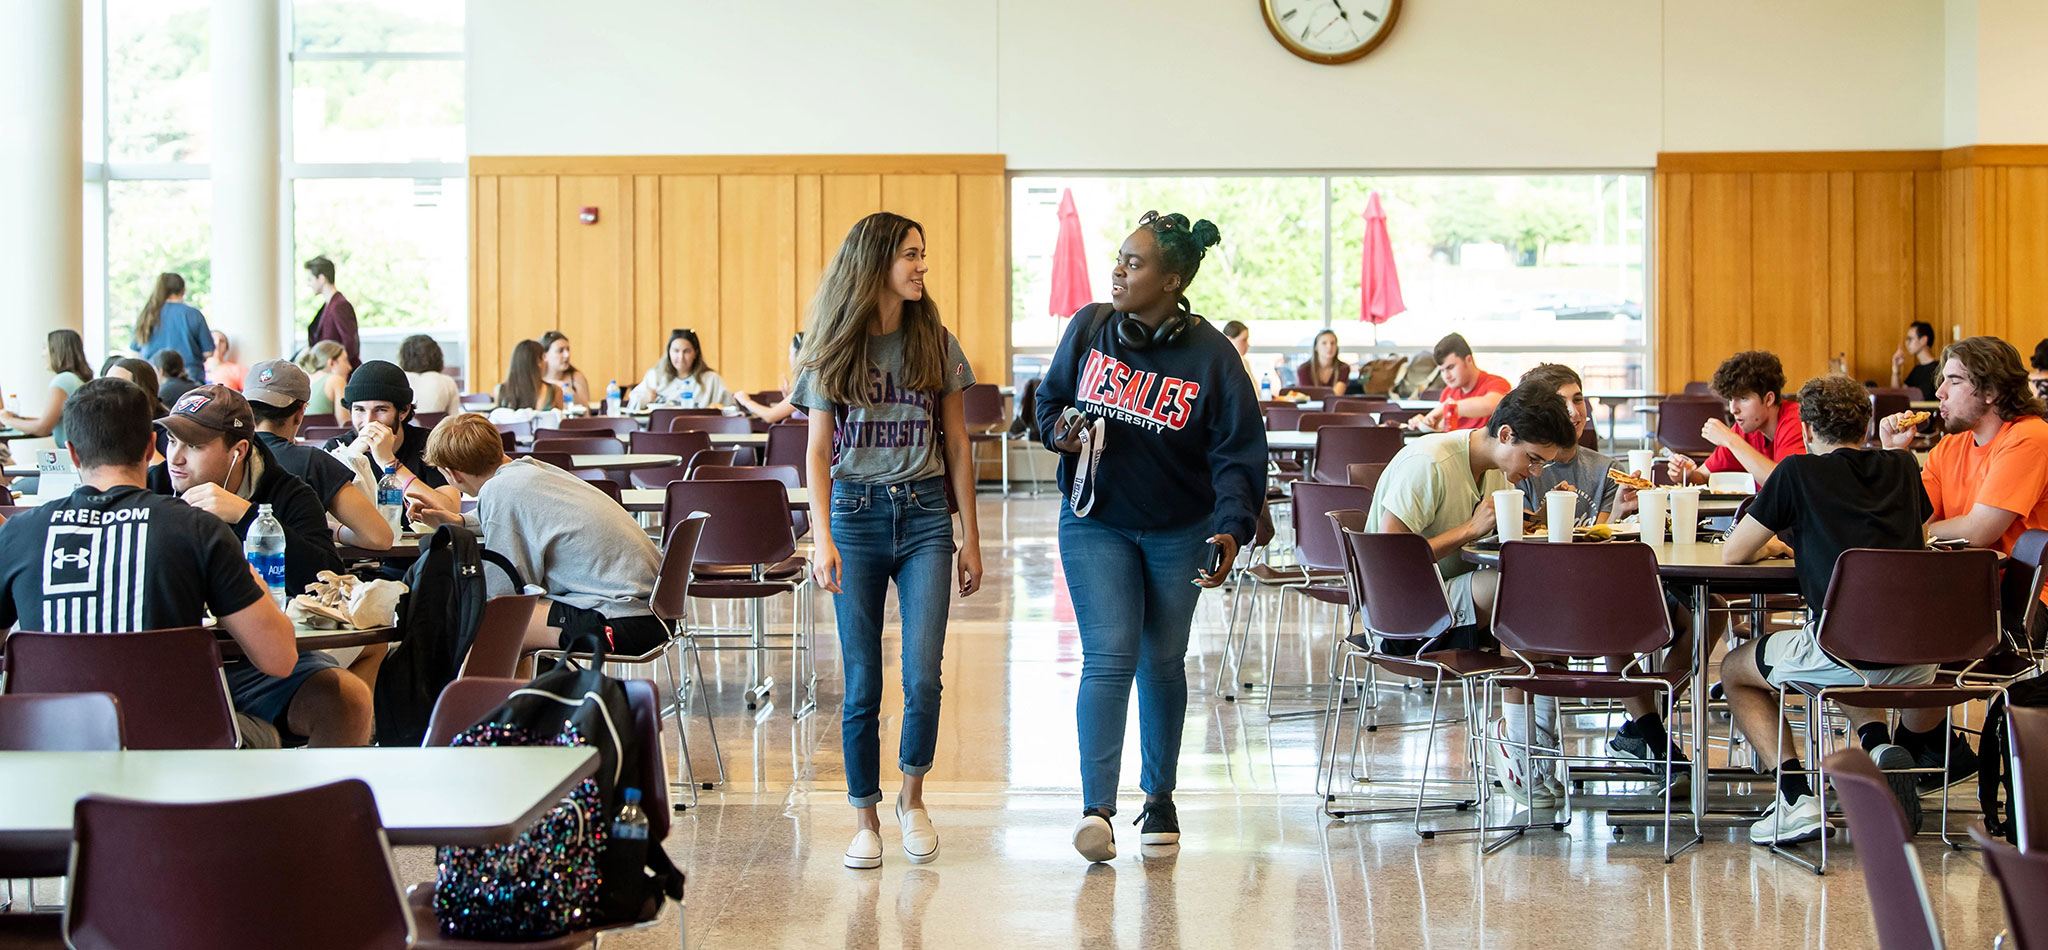 Two DeSales University students walking, smiling, and talking in the cafeteria.